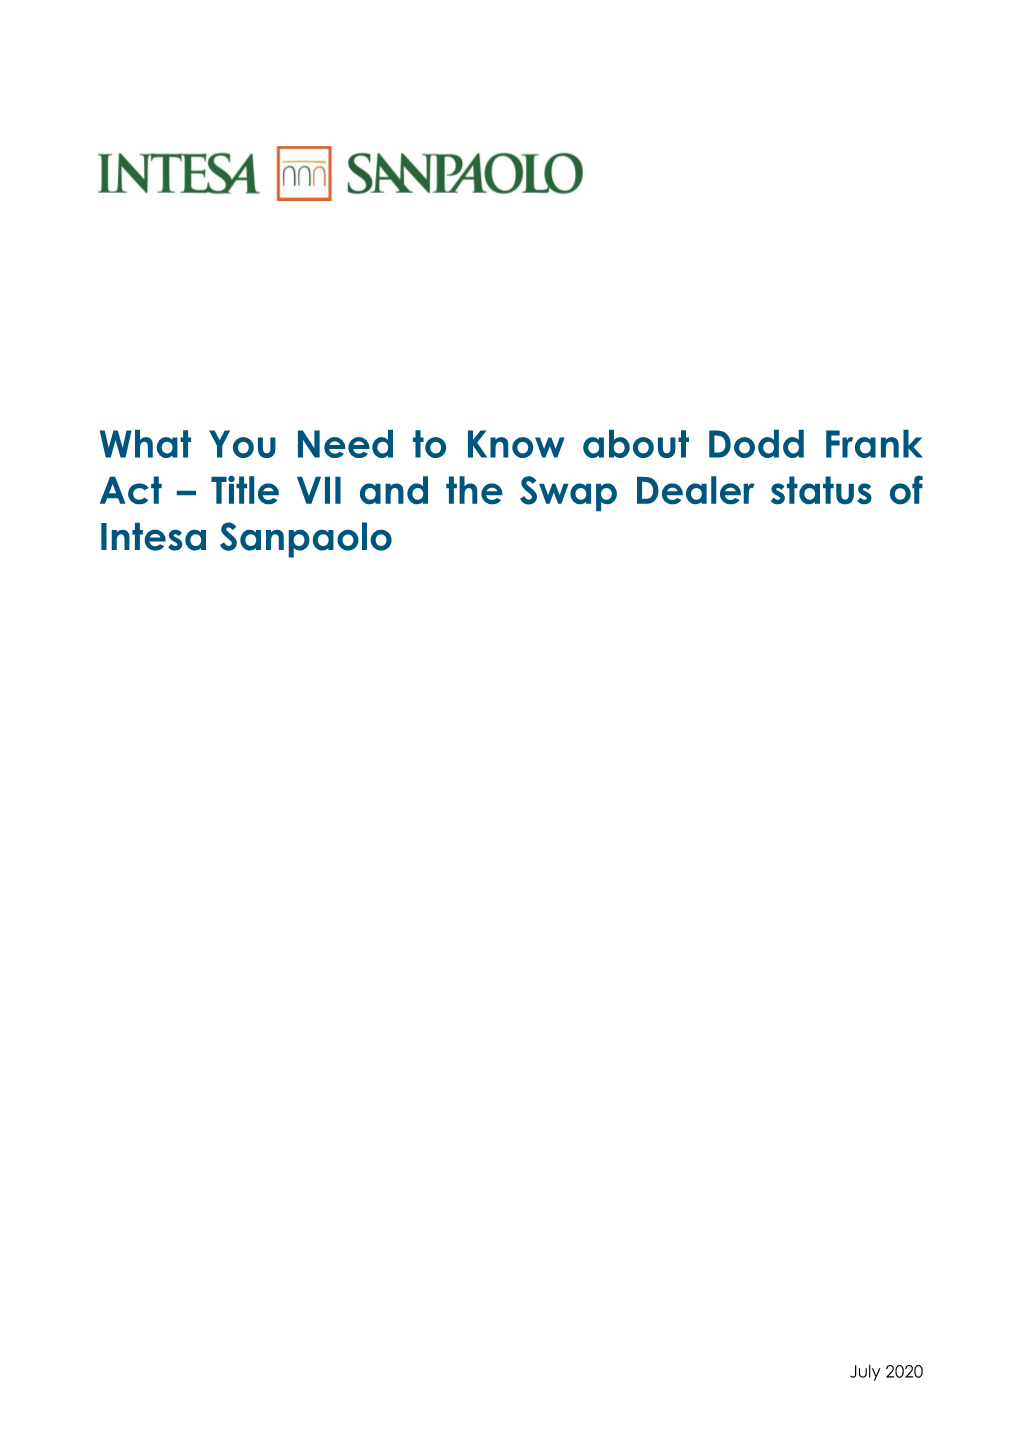 Dodd Frank Act Title VII: What You Need to Know